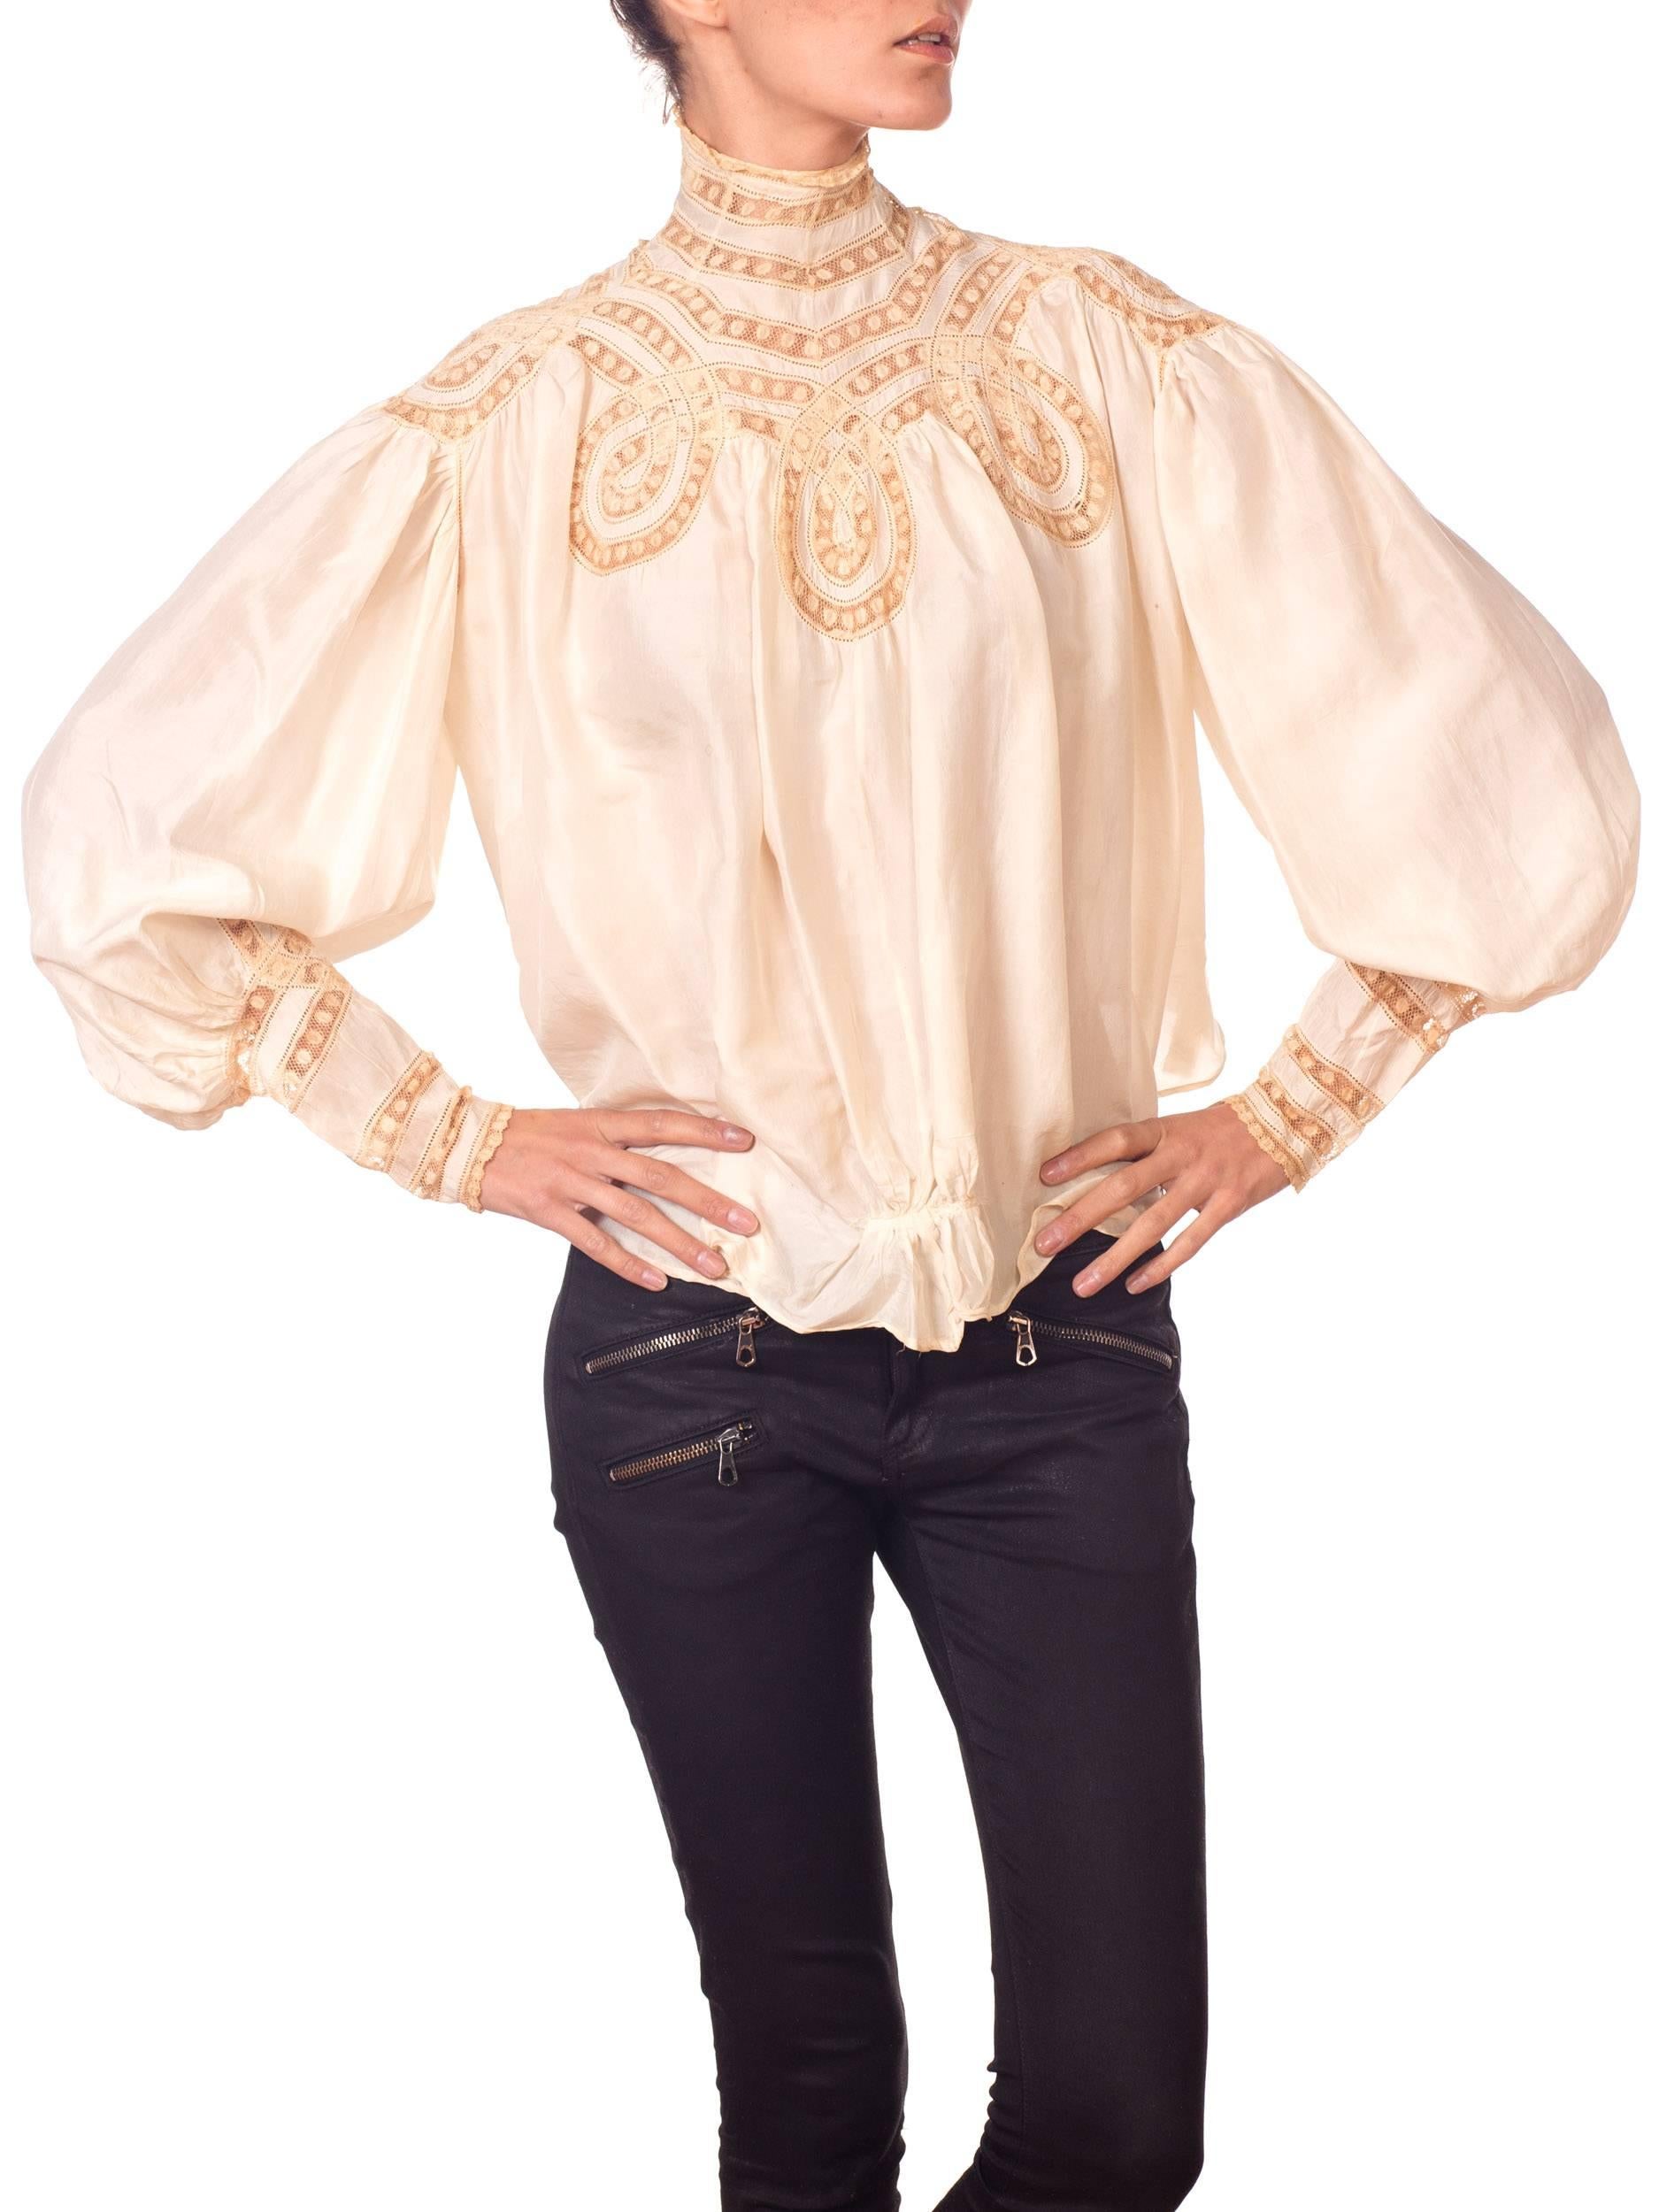 Victorian high neck Silk Top with Swirls Of Lace Inlay Details 3